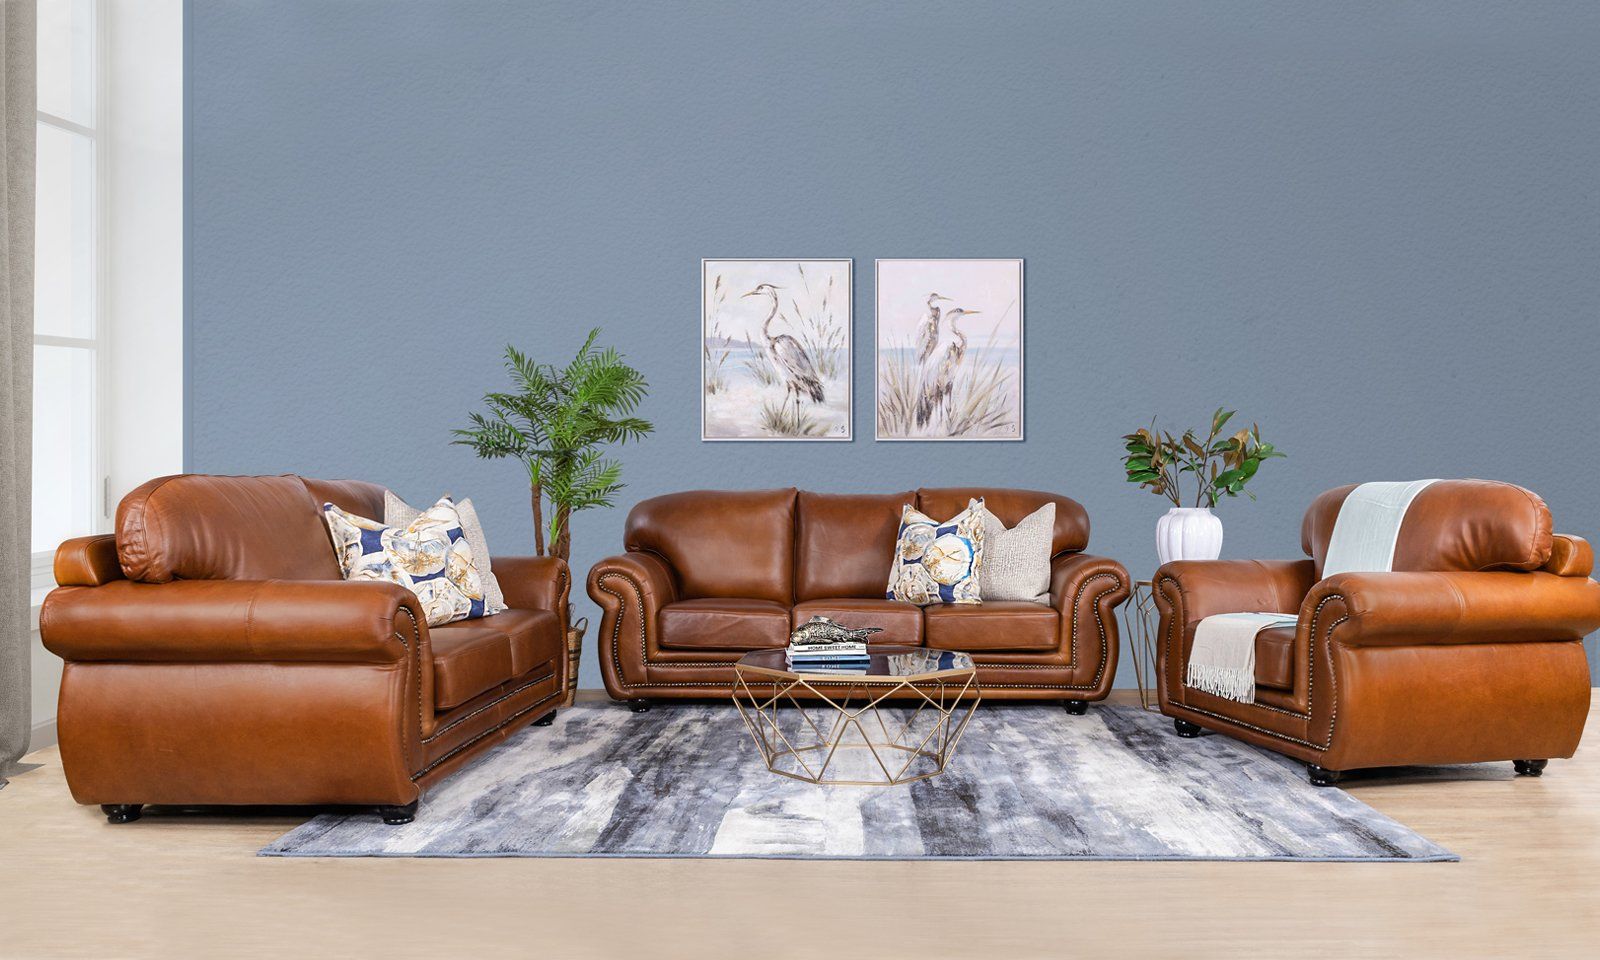 WHY THE ISILO LEATHER SOFA SUITE IS PERFECT FOR FAMILY LIVING ROOMS